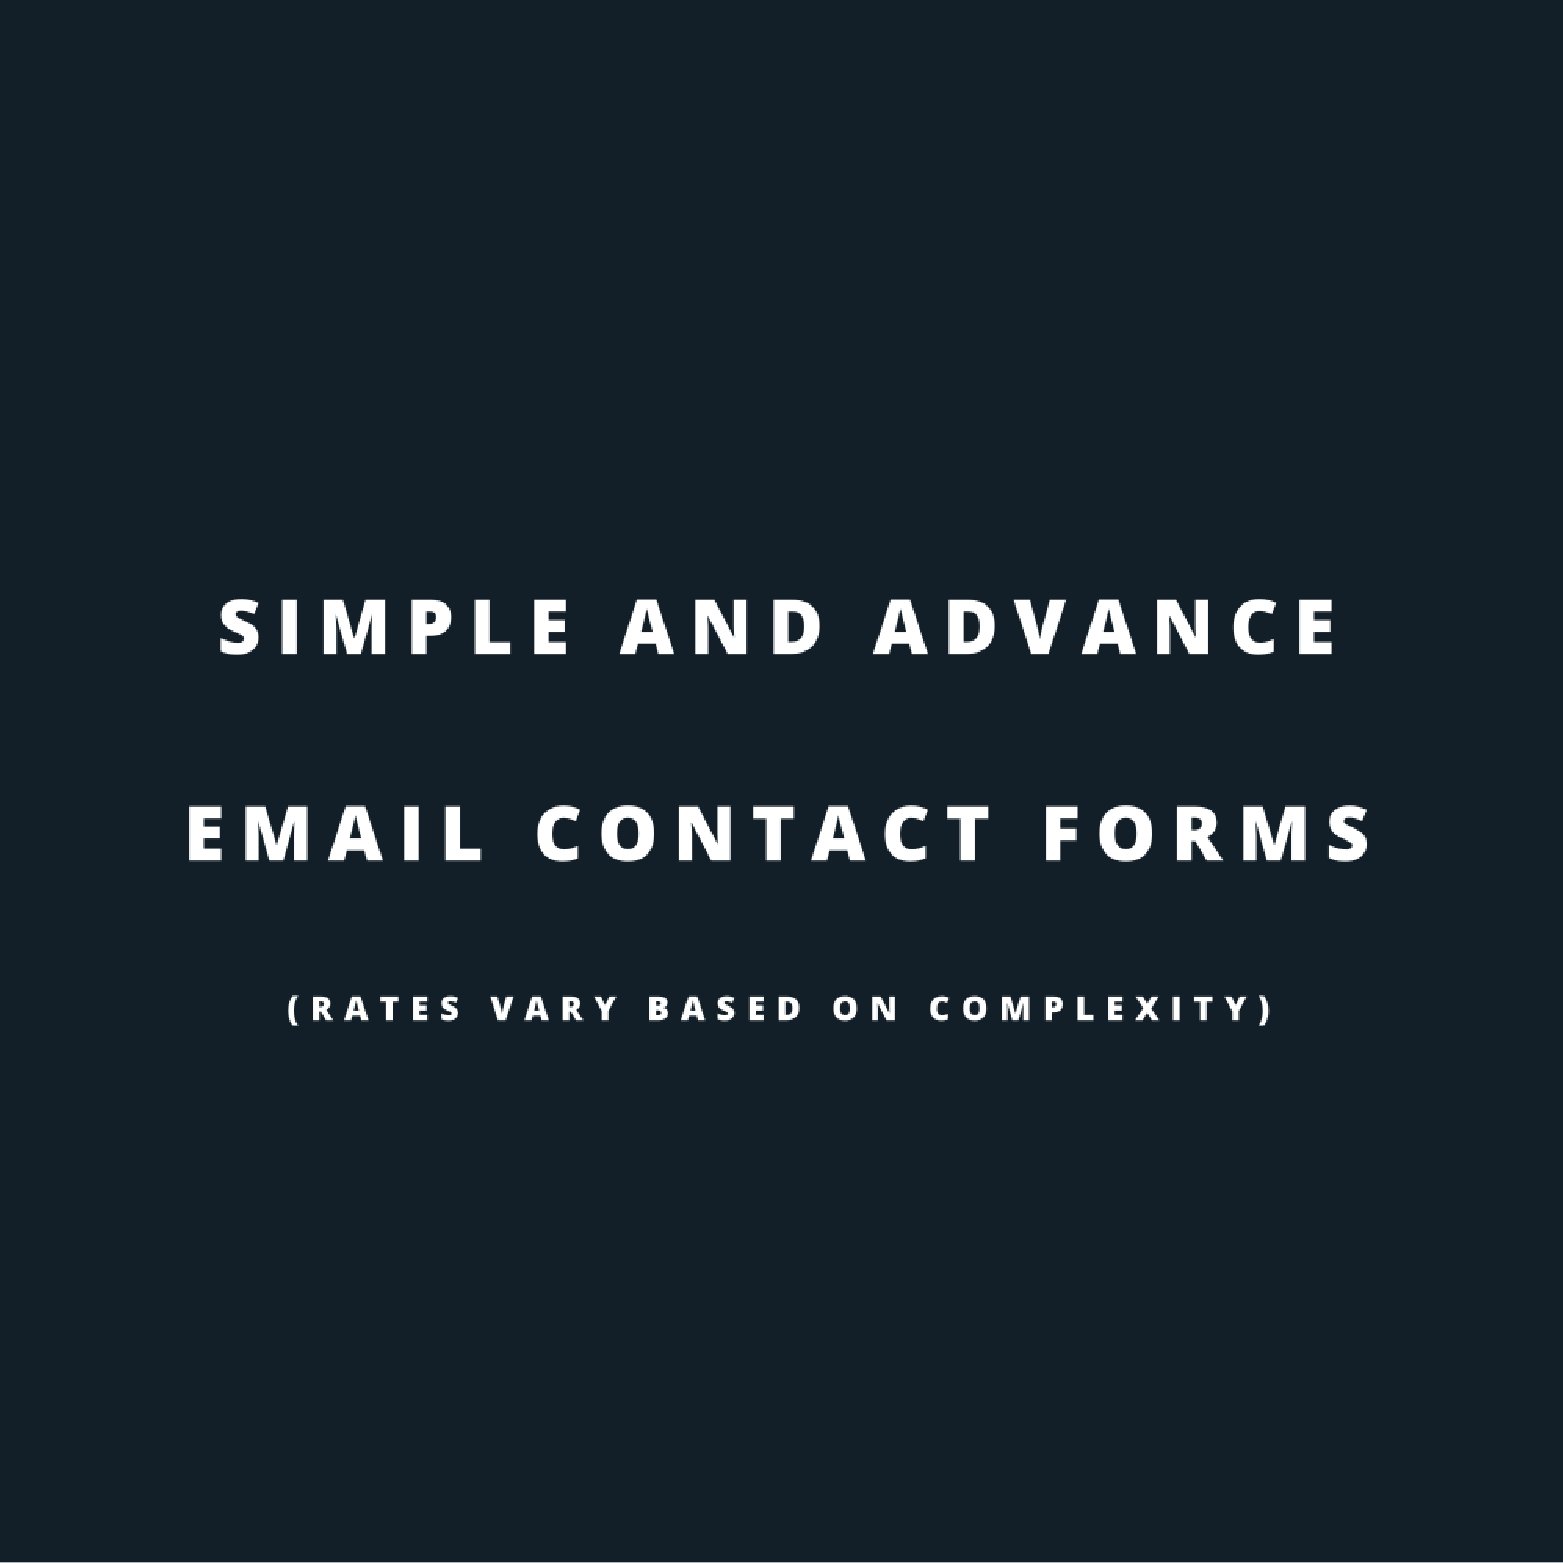 Simple and advance email contact forms (rates vary based on complexity)